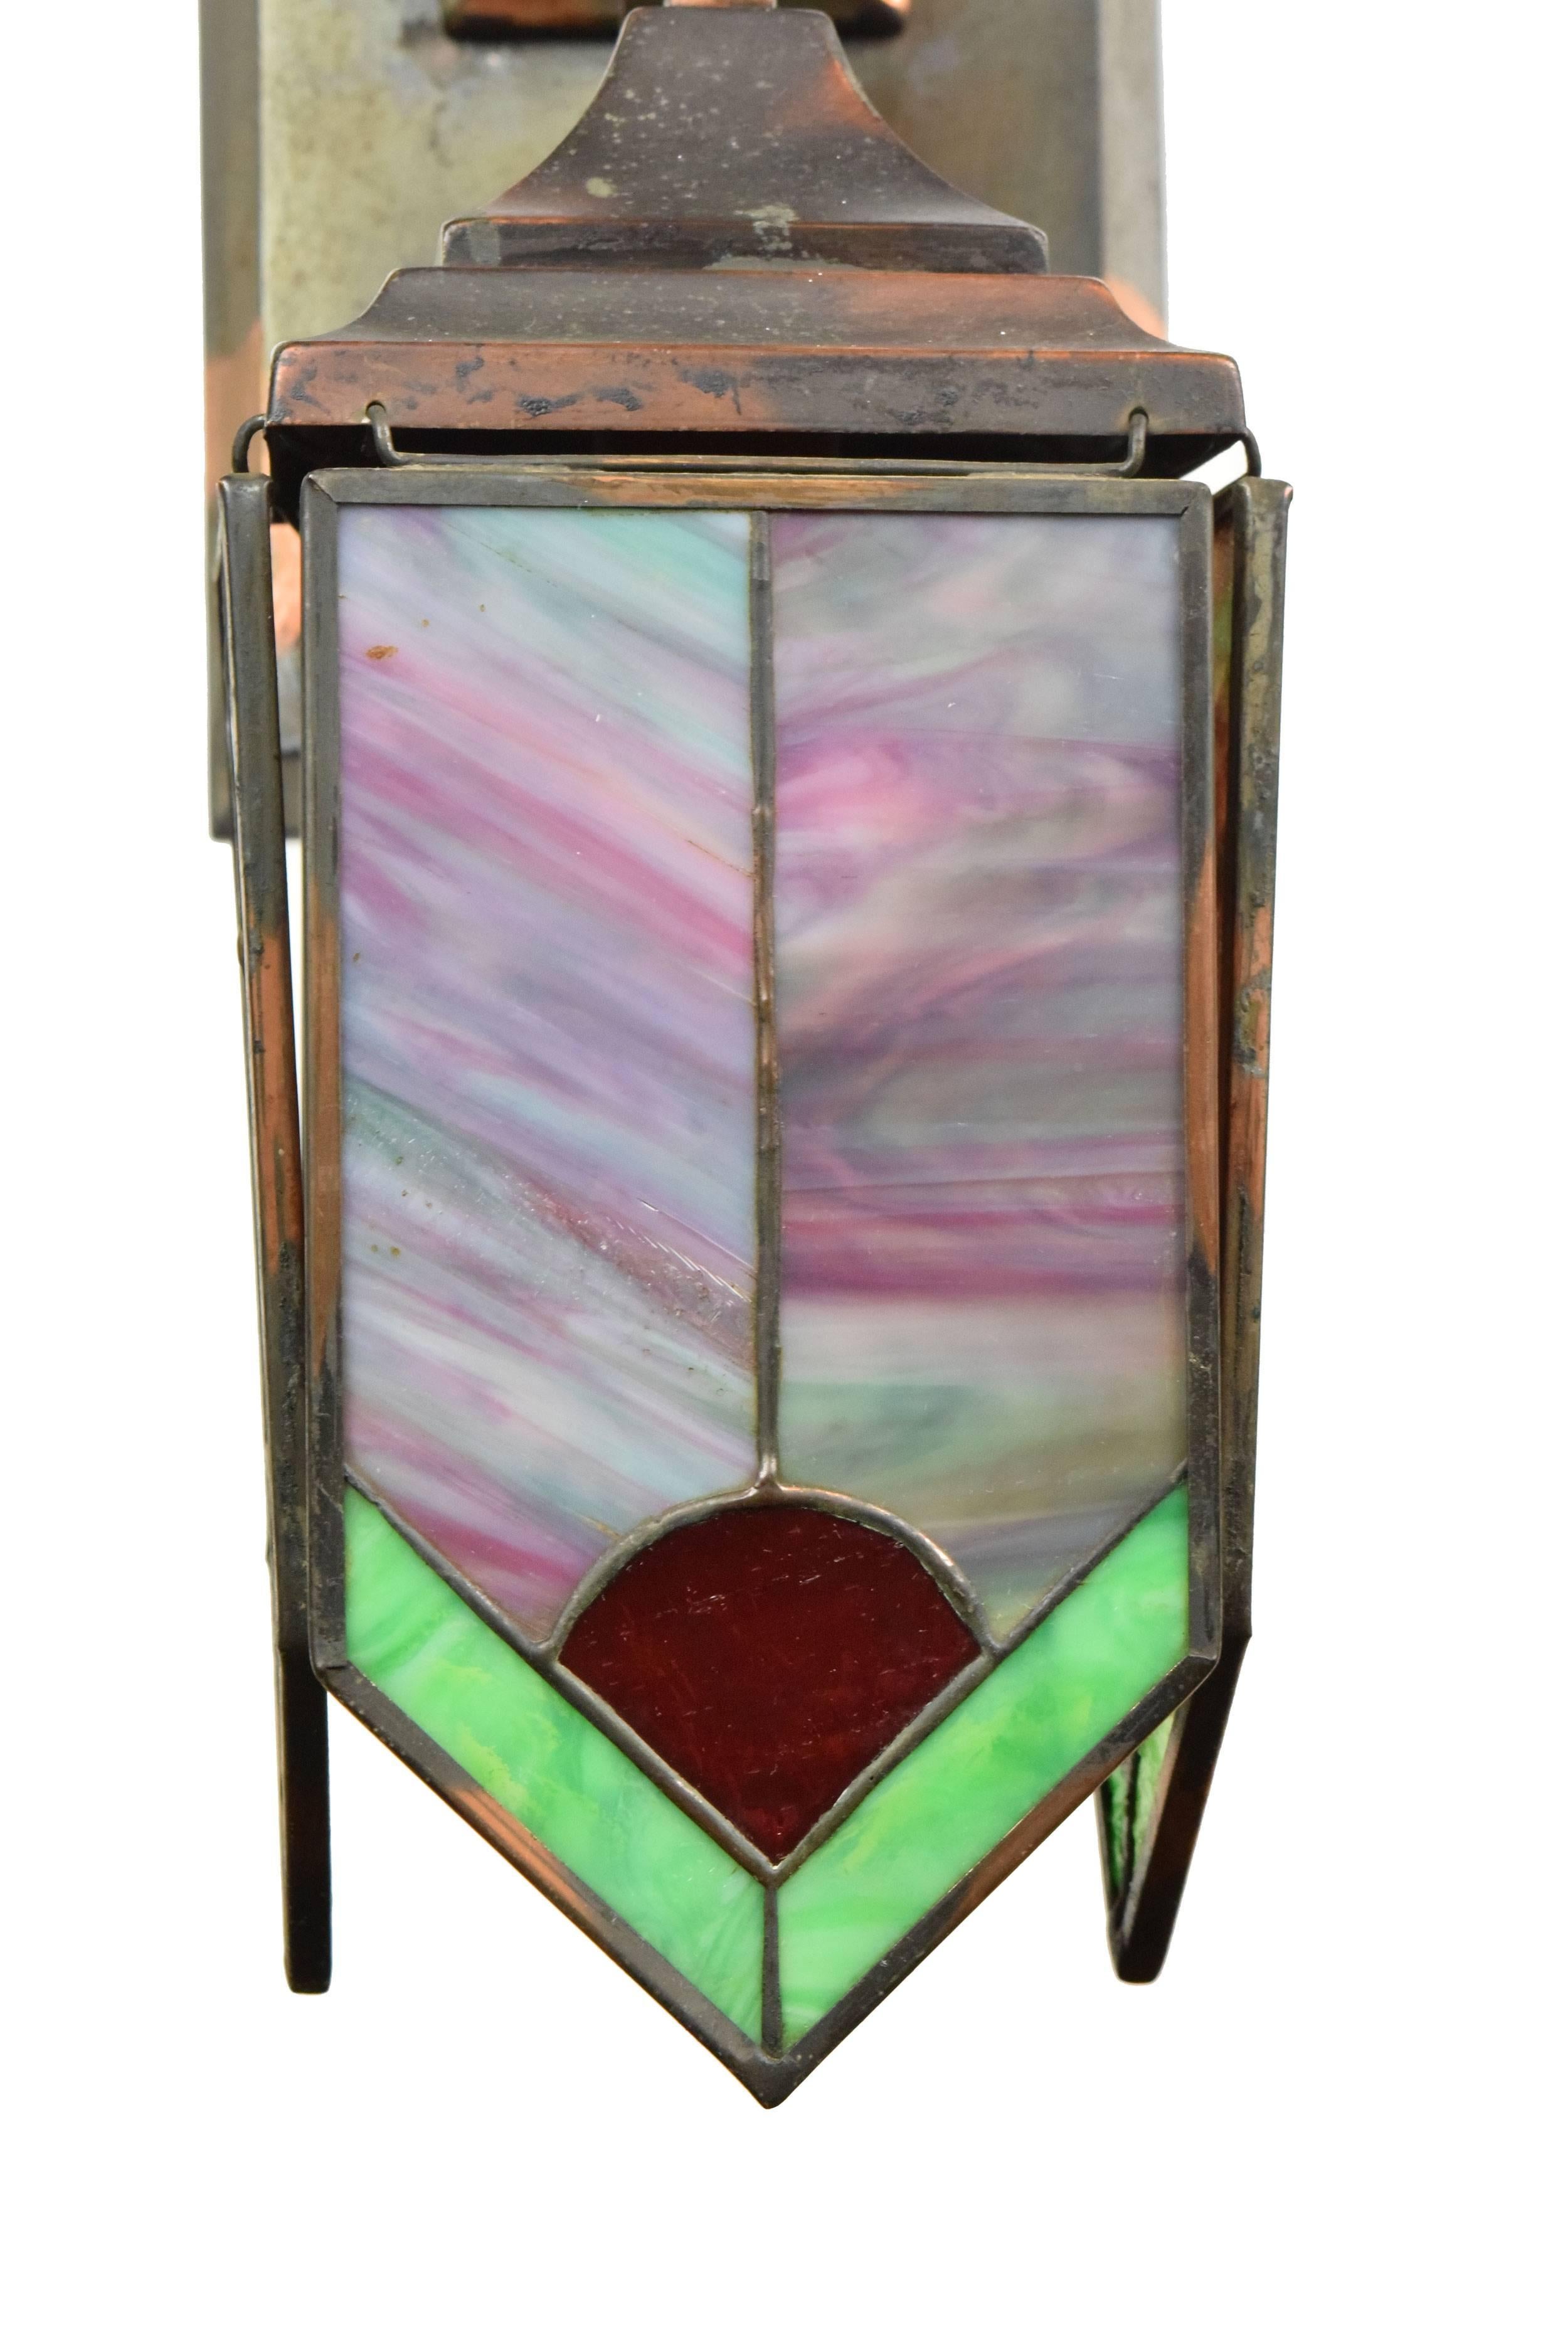 This oversized Mission sconce features a rich gilt and satin finish and unique hanging stained glass panels that add a delicate touch to this masculine fixture. Lovely when lit or off - a true piece of decorative art.

We find that early antique